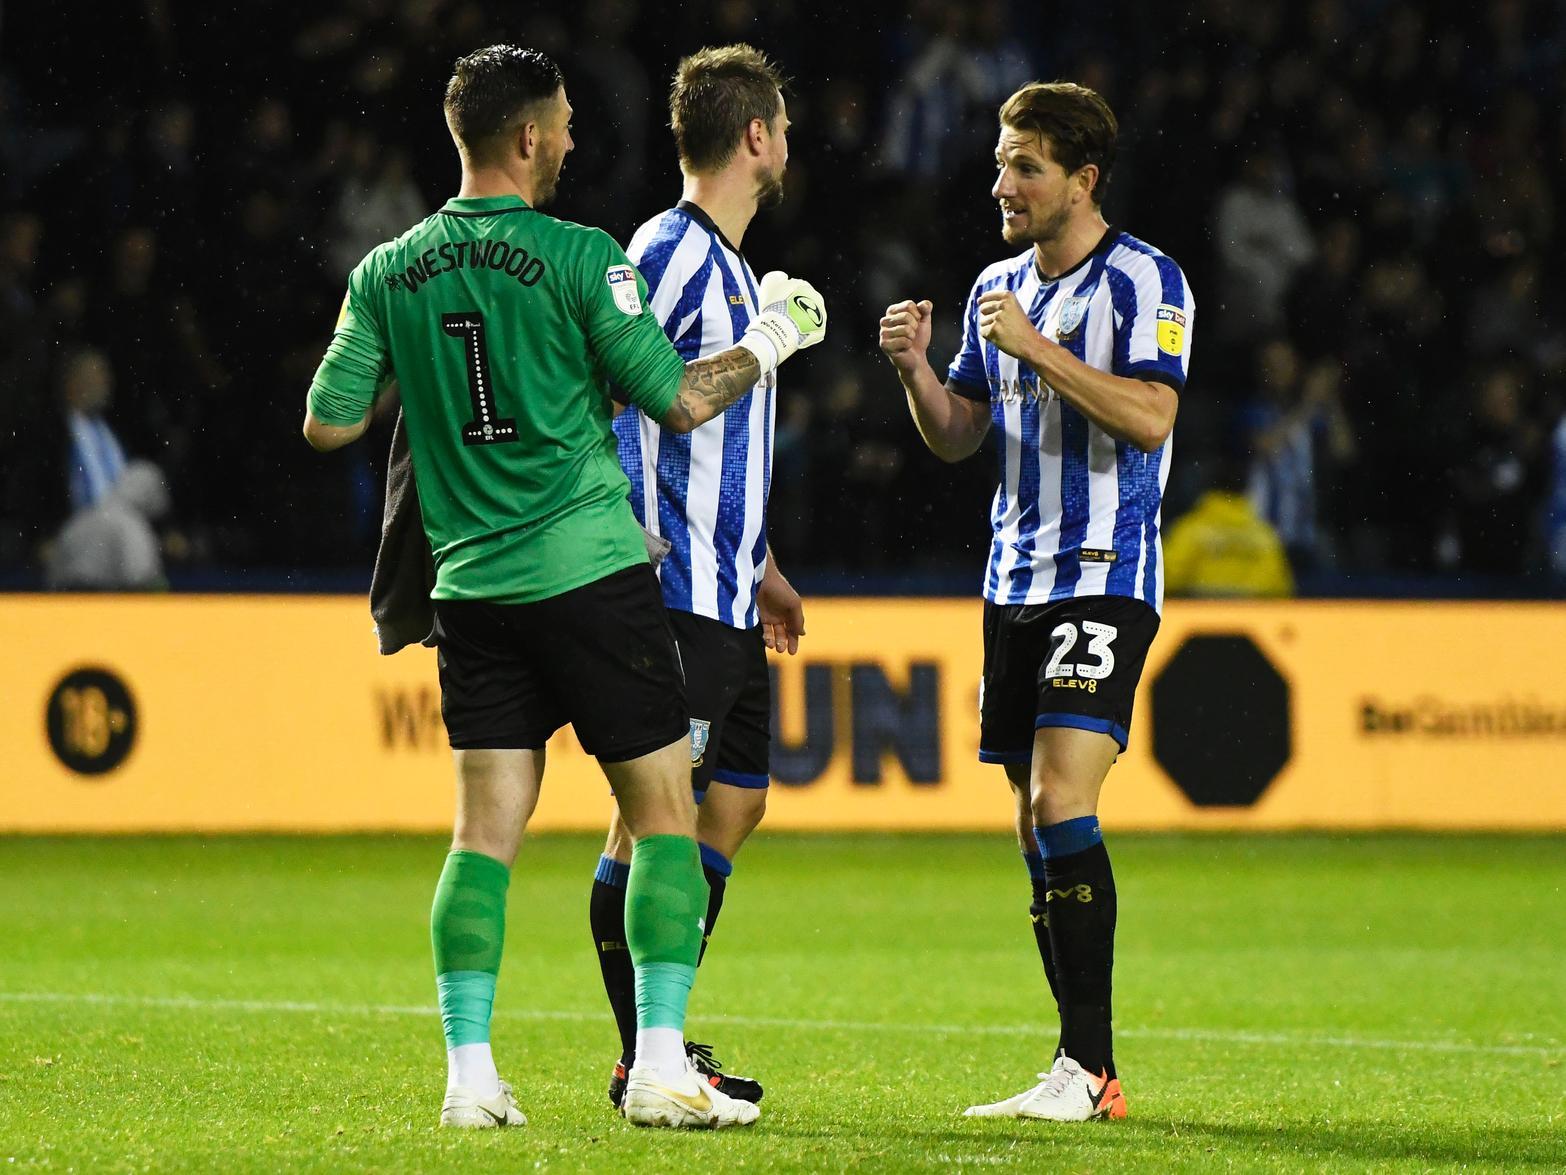 Sheffield Wednesday trio Keiren Westwood, Sam Hutchinson and David Bates are all understood to be training with the U23 squad, as boss Garry Monk looks to help "the environment" of the club. (Sheffield Star)